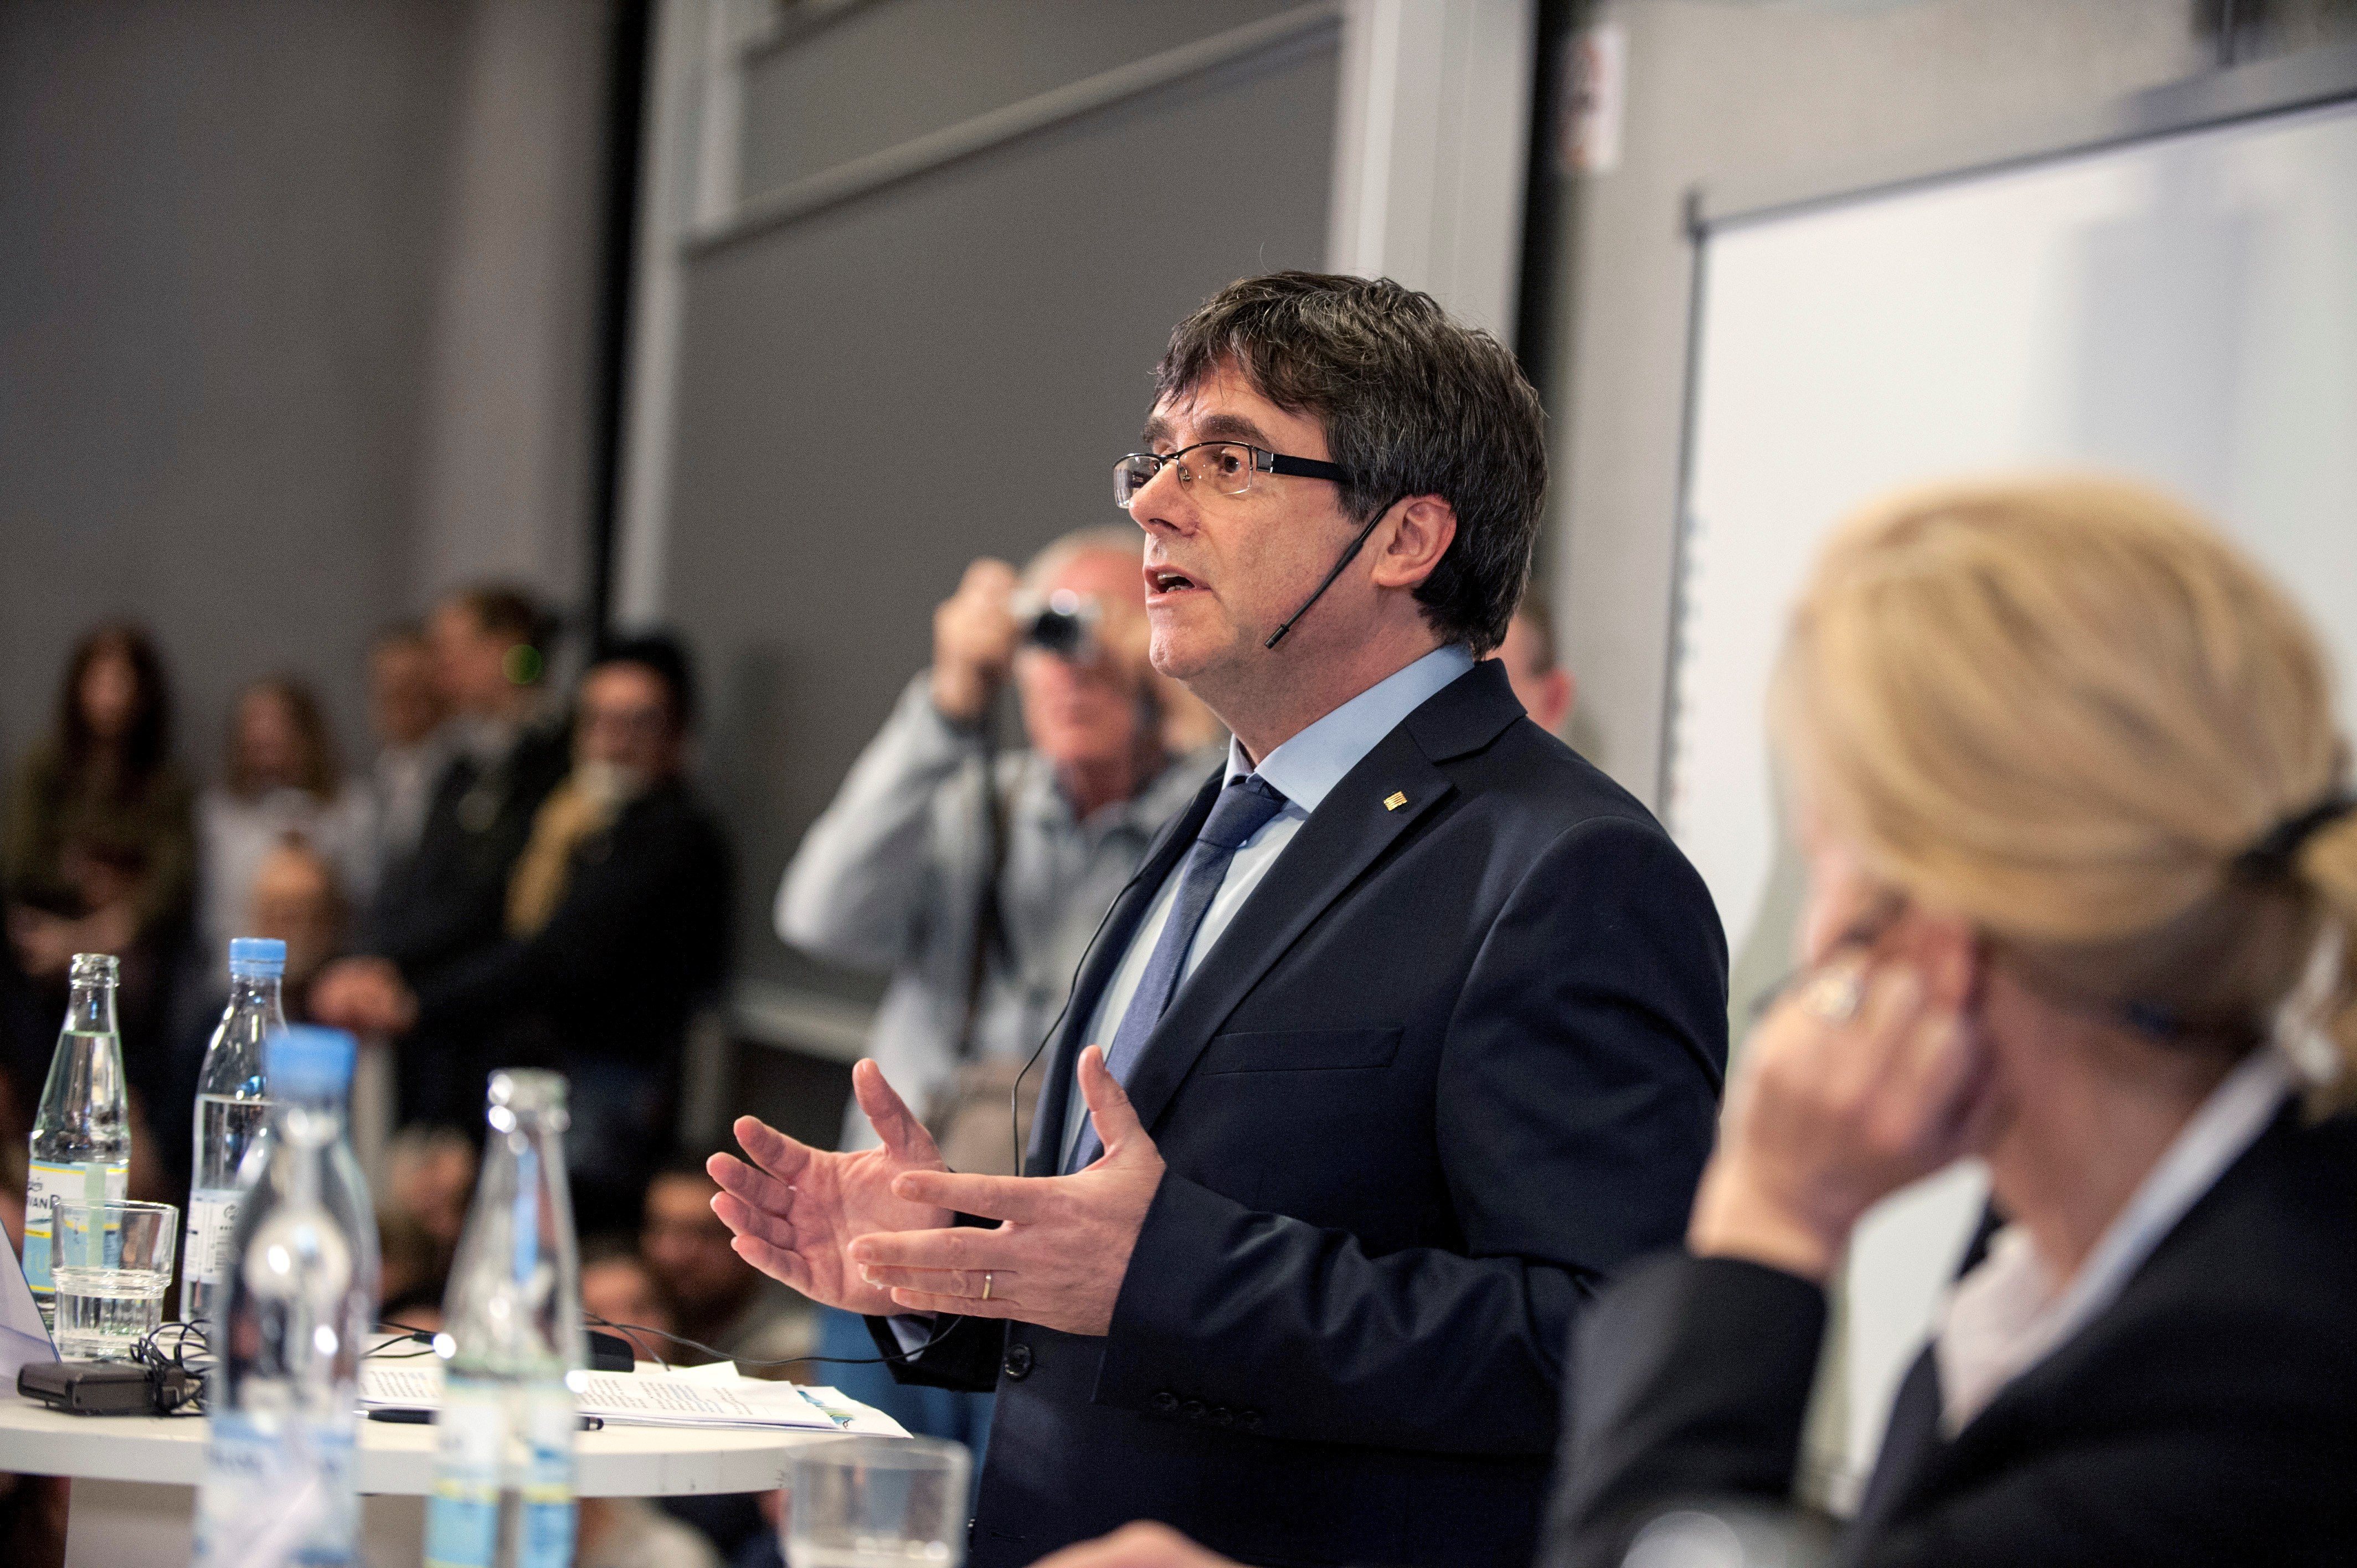 Puigdemont in Copenhagen: "In Catalonia, democracy in the whole of Europe is at stake"